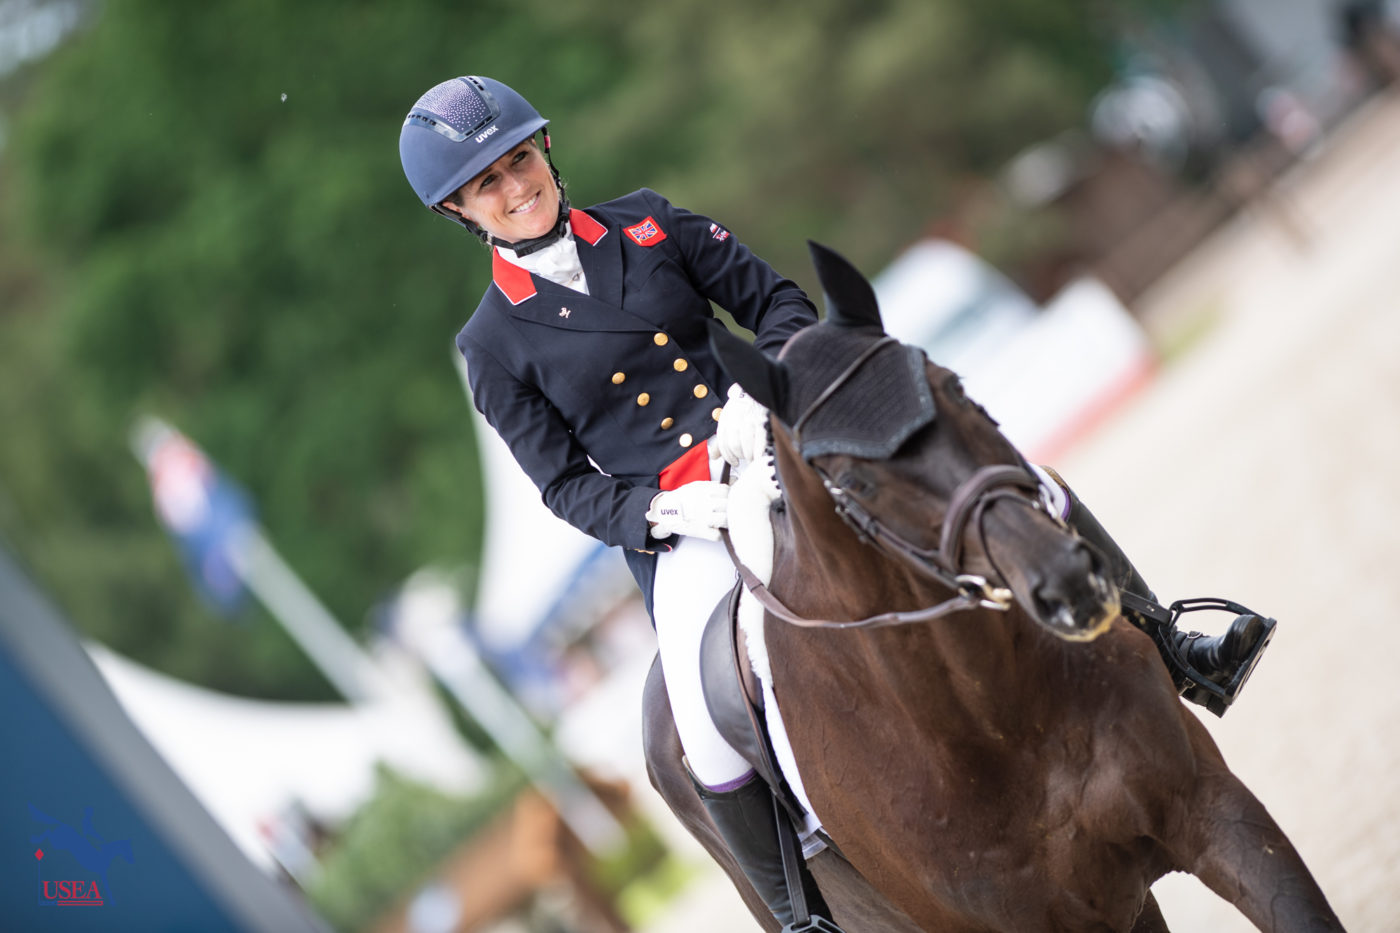 Laura Collett was all smiles after her test with Dacapo. USEA/Lindsay Berreth photo